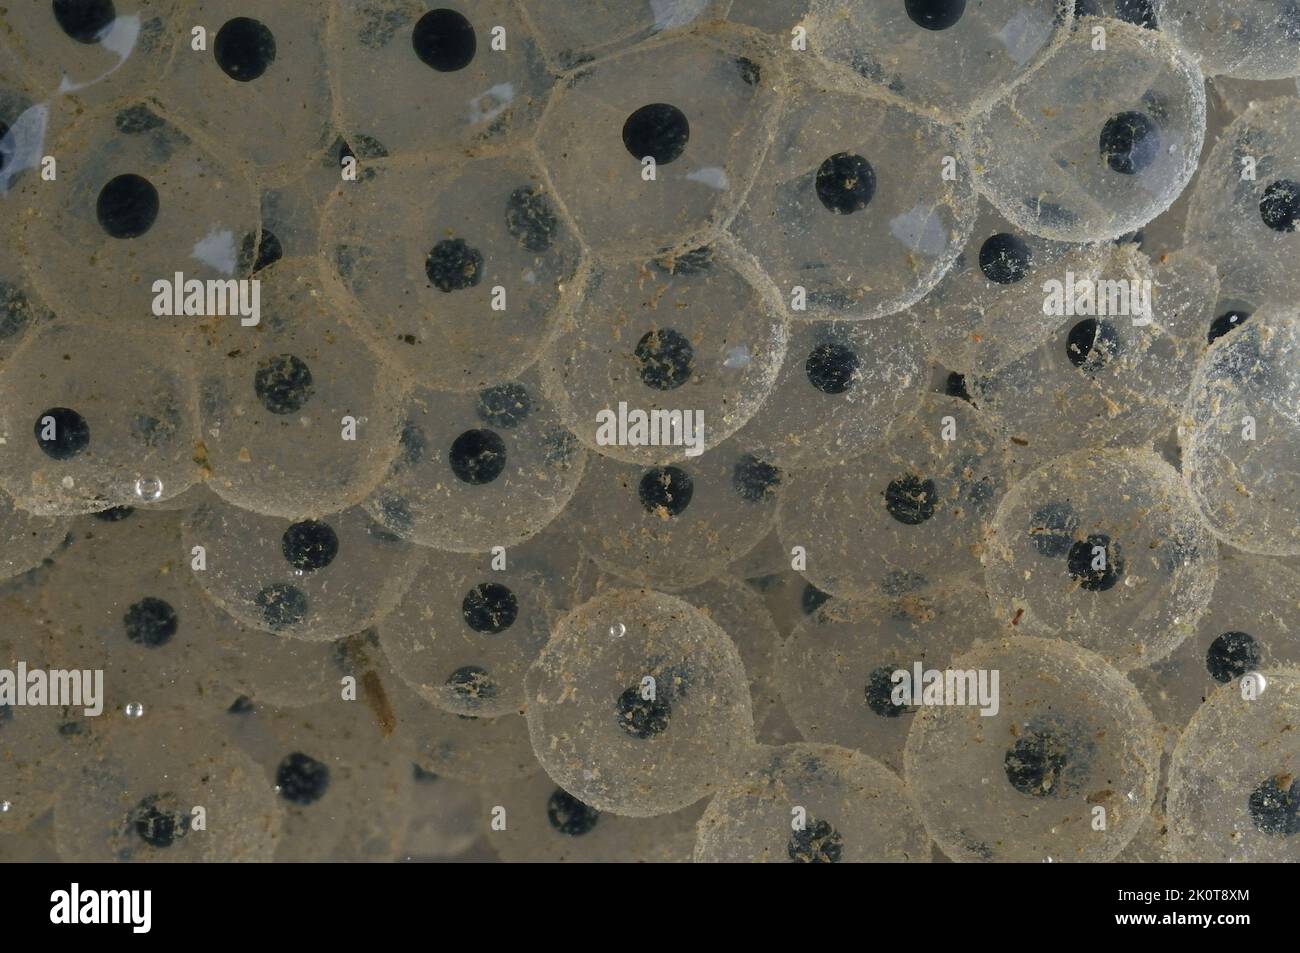 Common frog (Rana temporaria) clusters of eggs - embryos after 3 days Stock Photo